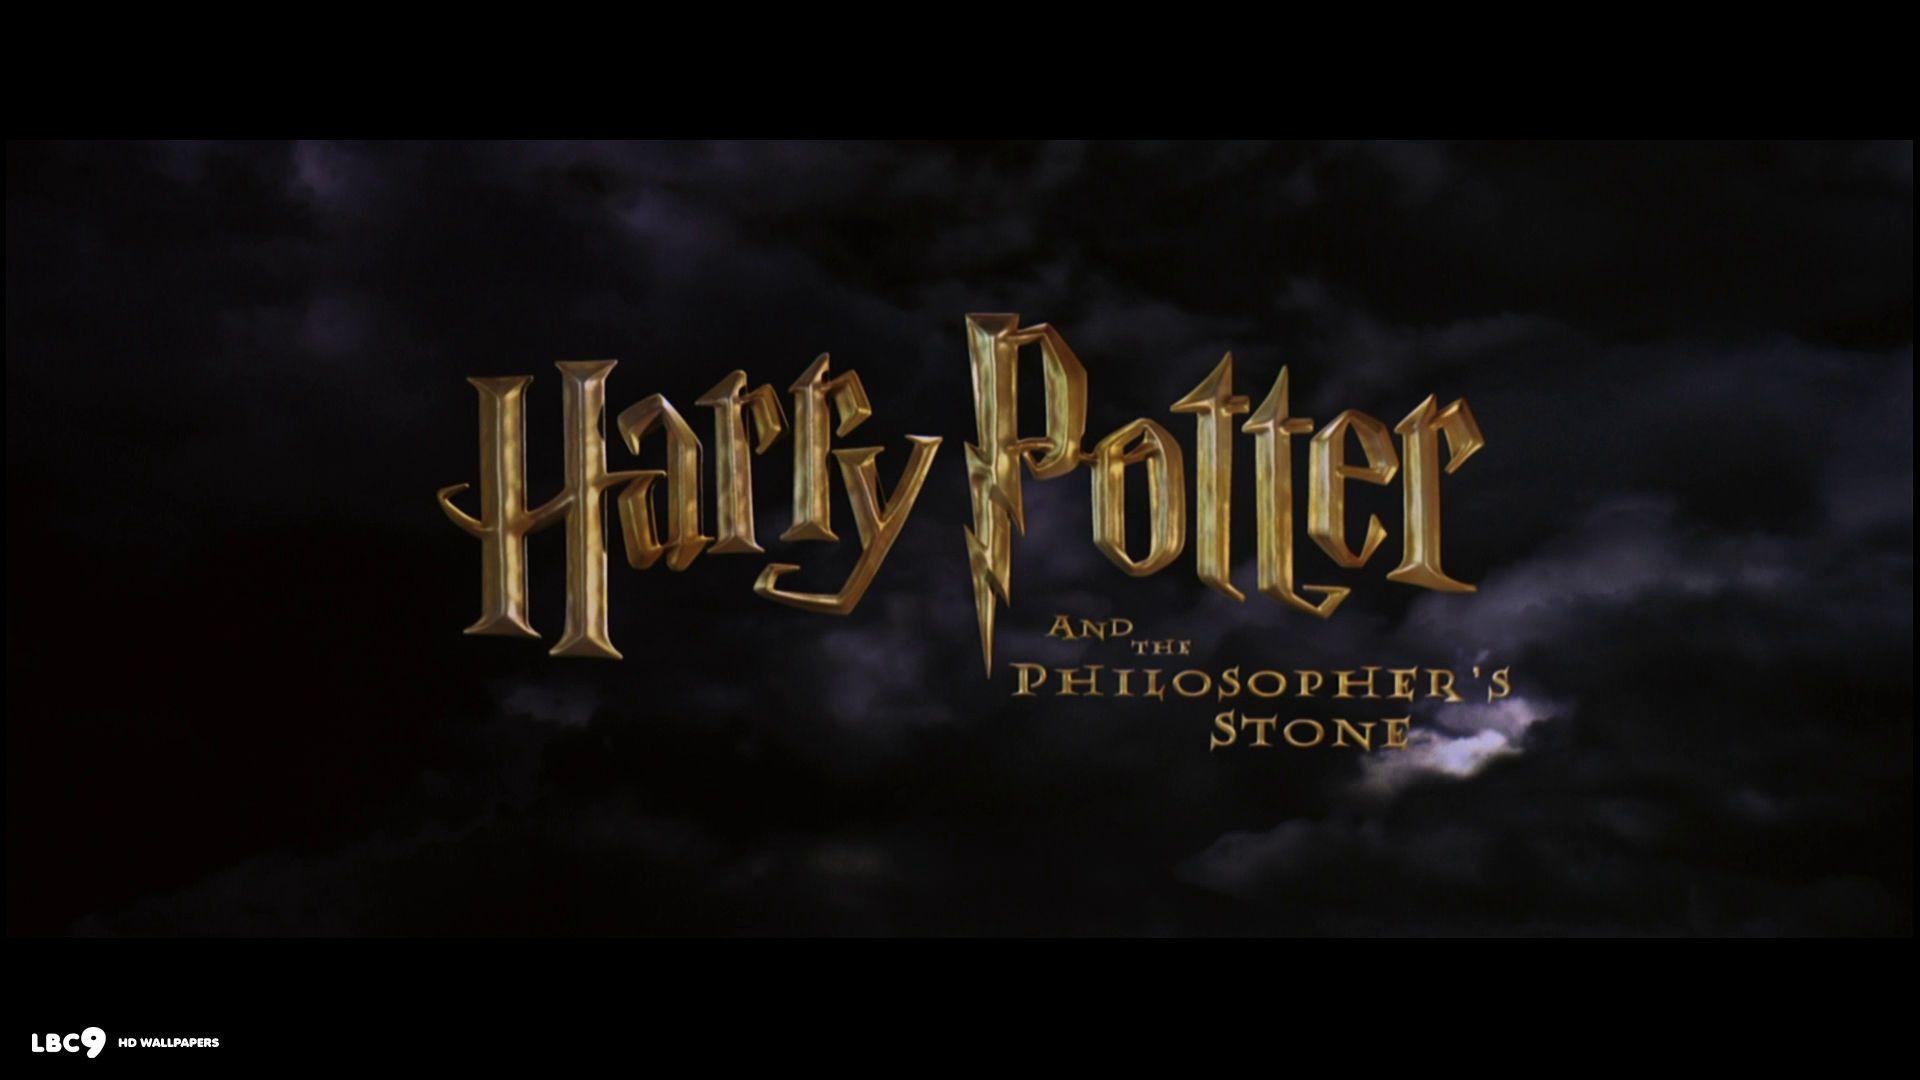 Harry Potter Logo Wallpapers Top Free Harry Potter Logo Backgrounds Wallpaperaccess